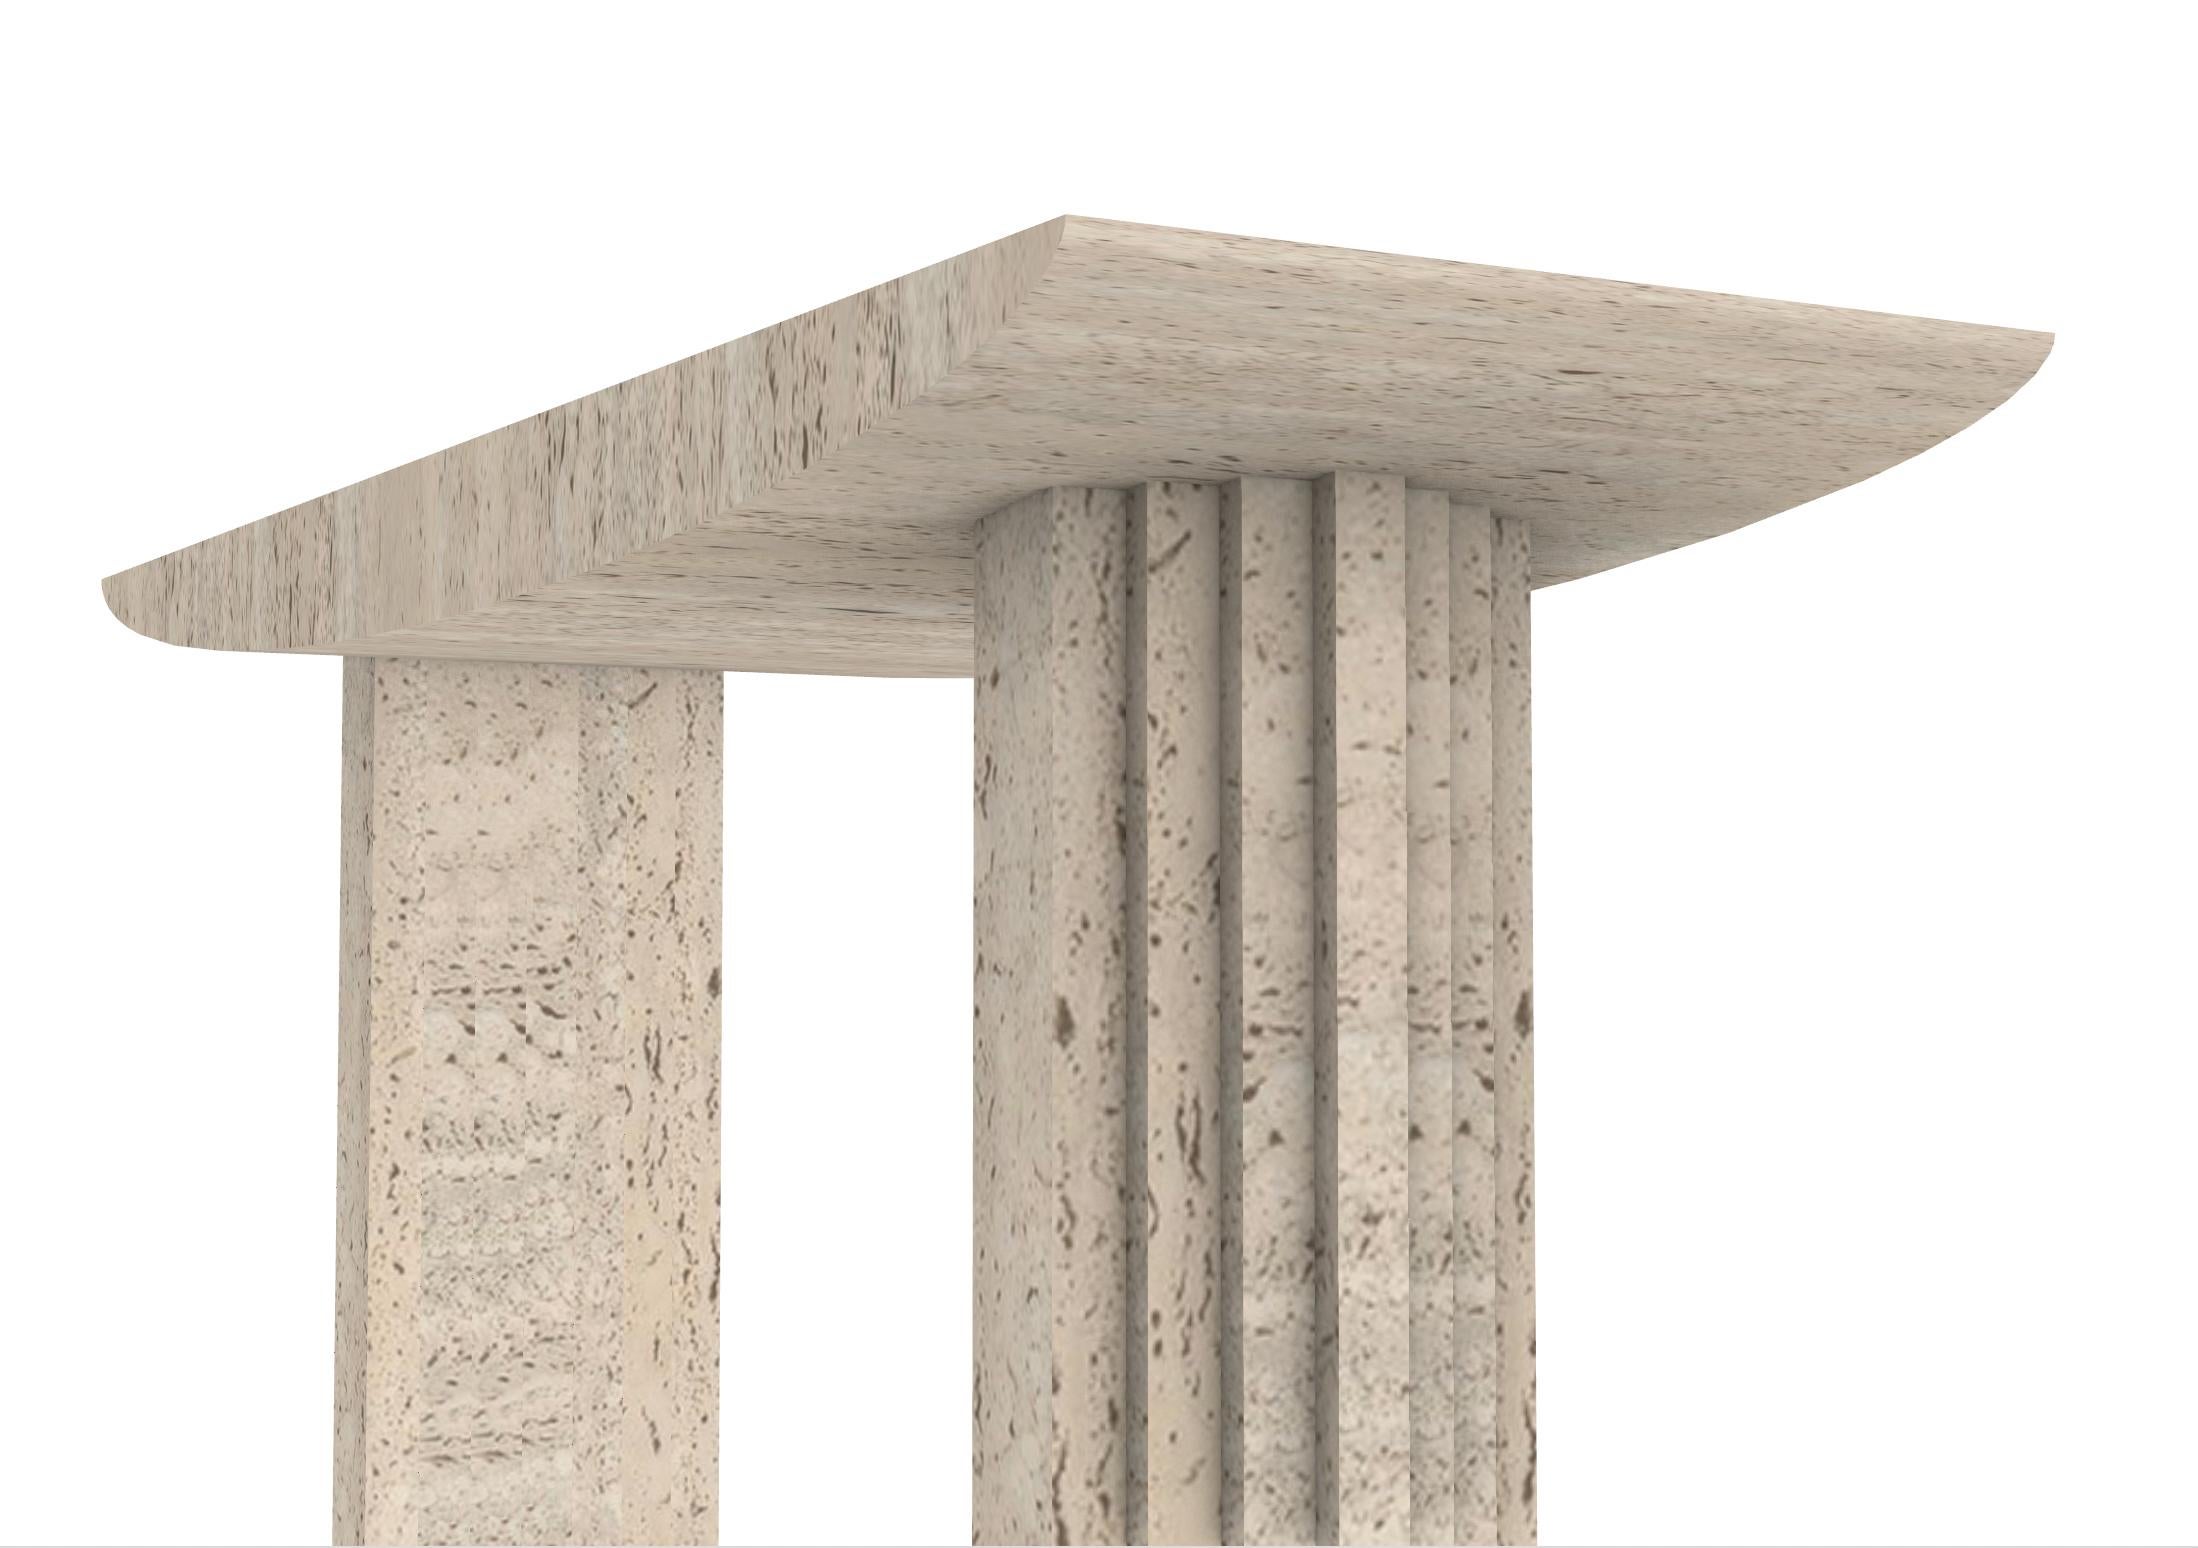 Sculptural Console table 0024c in Travertine stone by artist Desia Ava For Sale 1